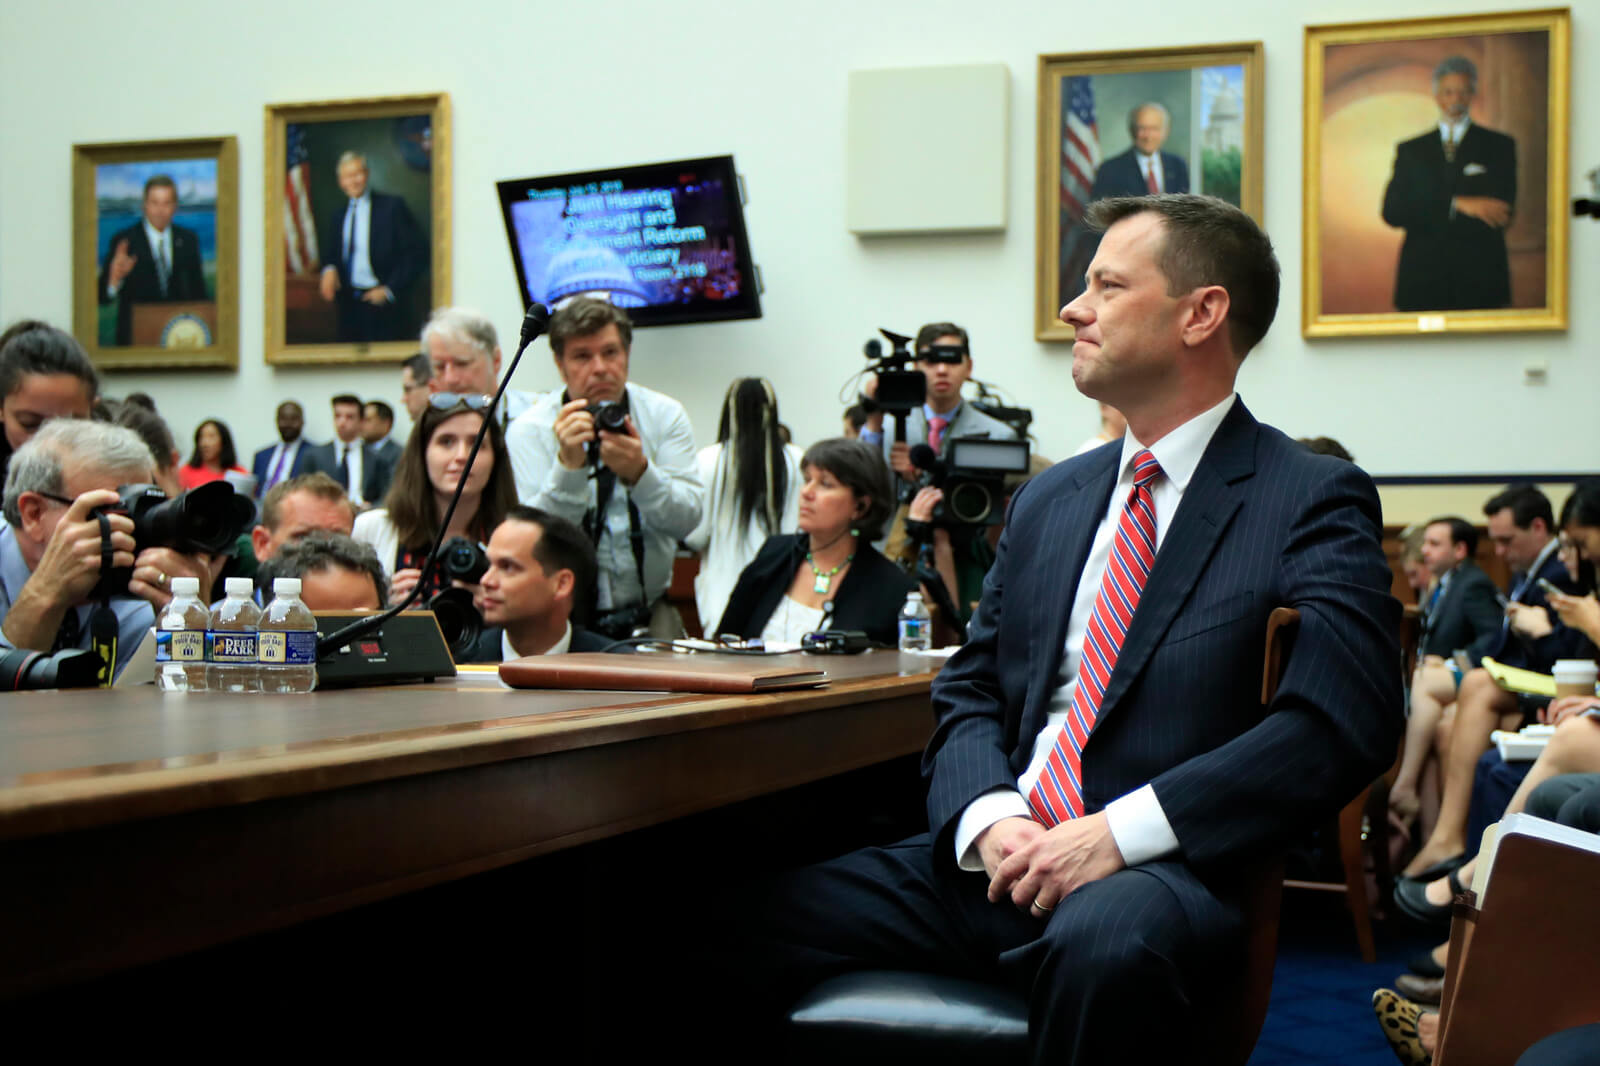 FBI Deputy Assistant Director Peter Strzok, waits for the start of a House Judiciary Committee joint hearing on "oversight of FBI and Department of Justice actions surrounding the 2016 election" on Capitol Hill in Washington, July 12, 2018. Manuel Balce Ceneta | AP